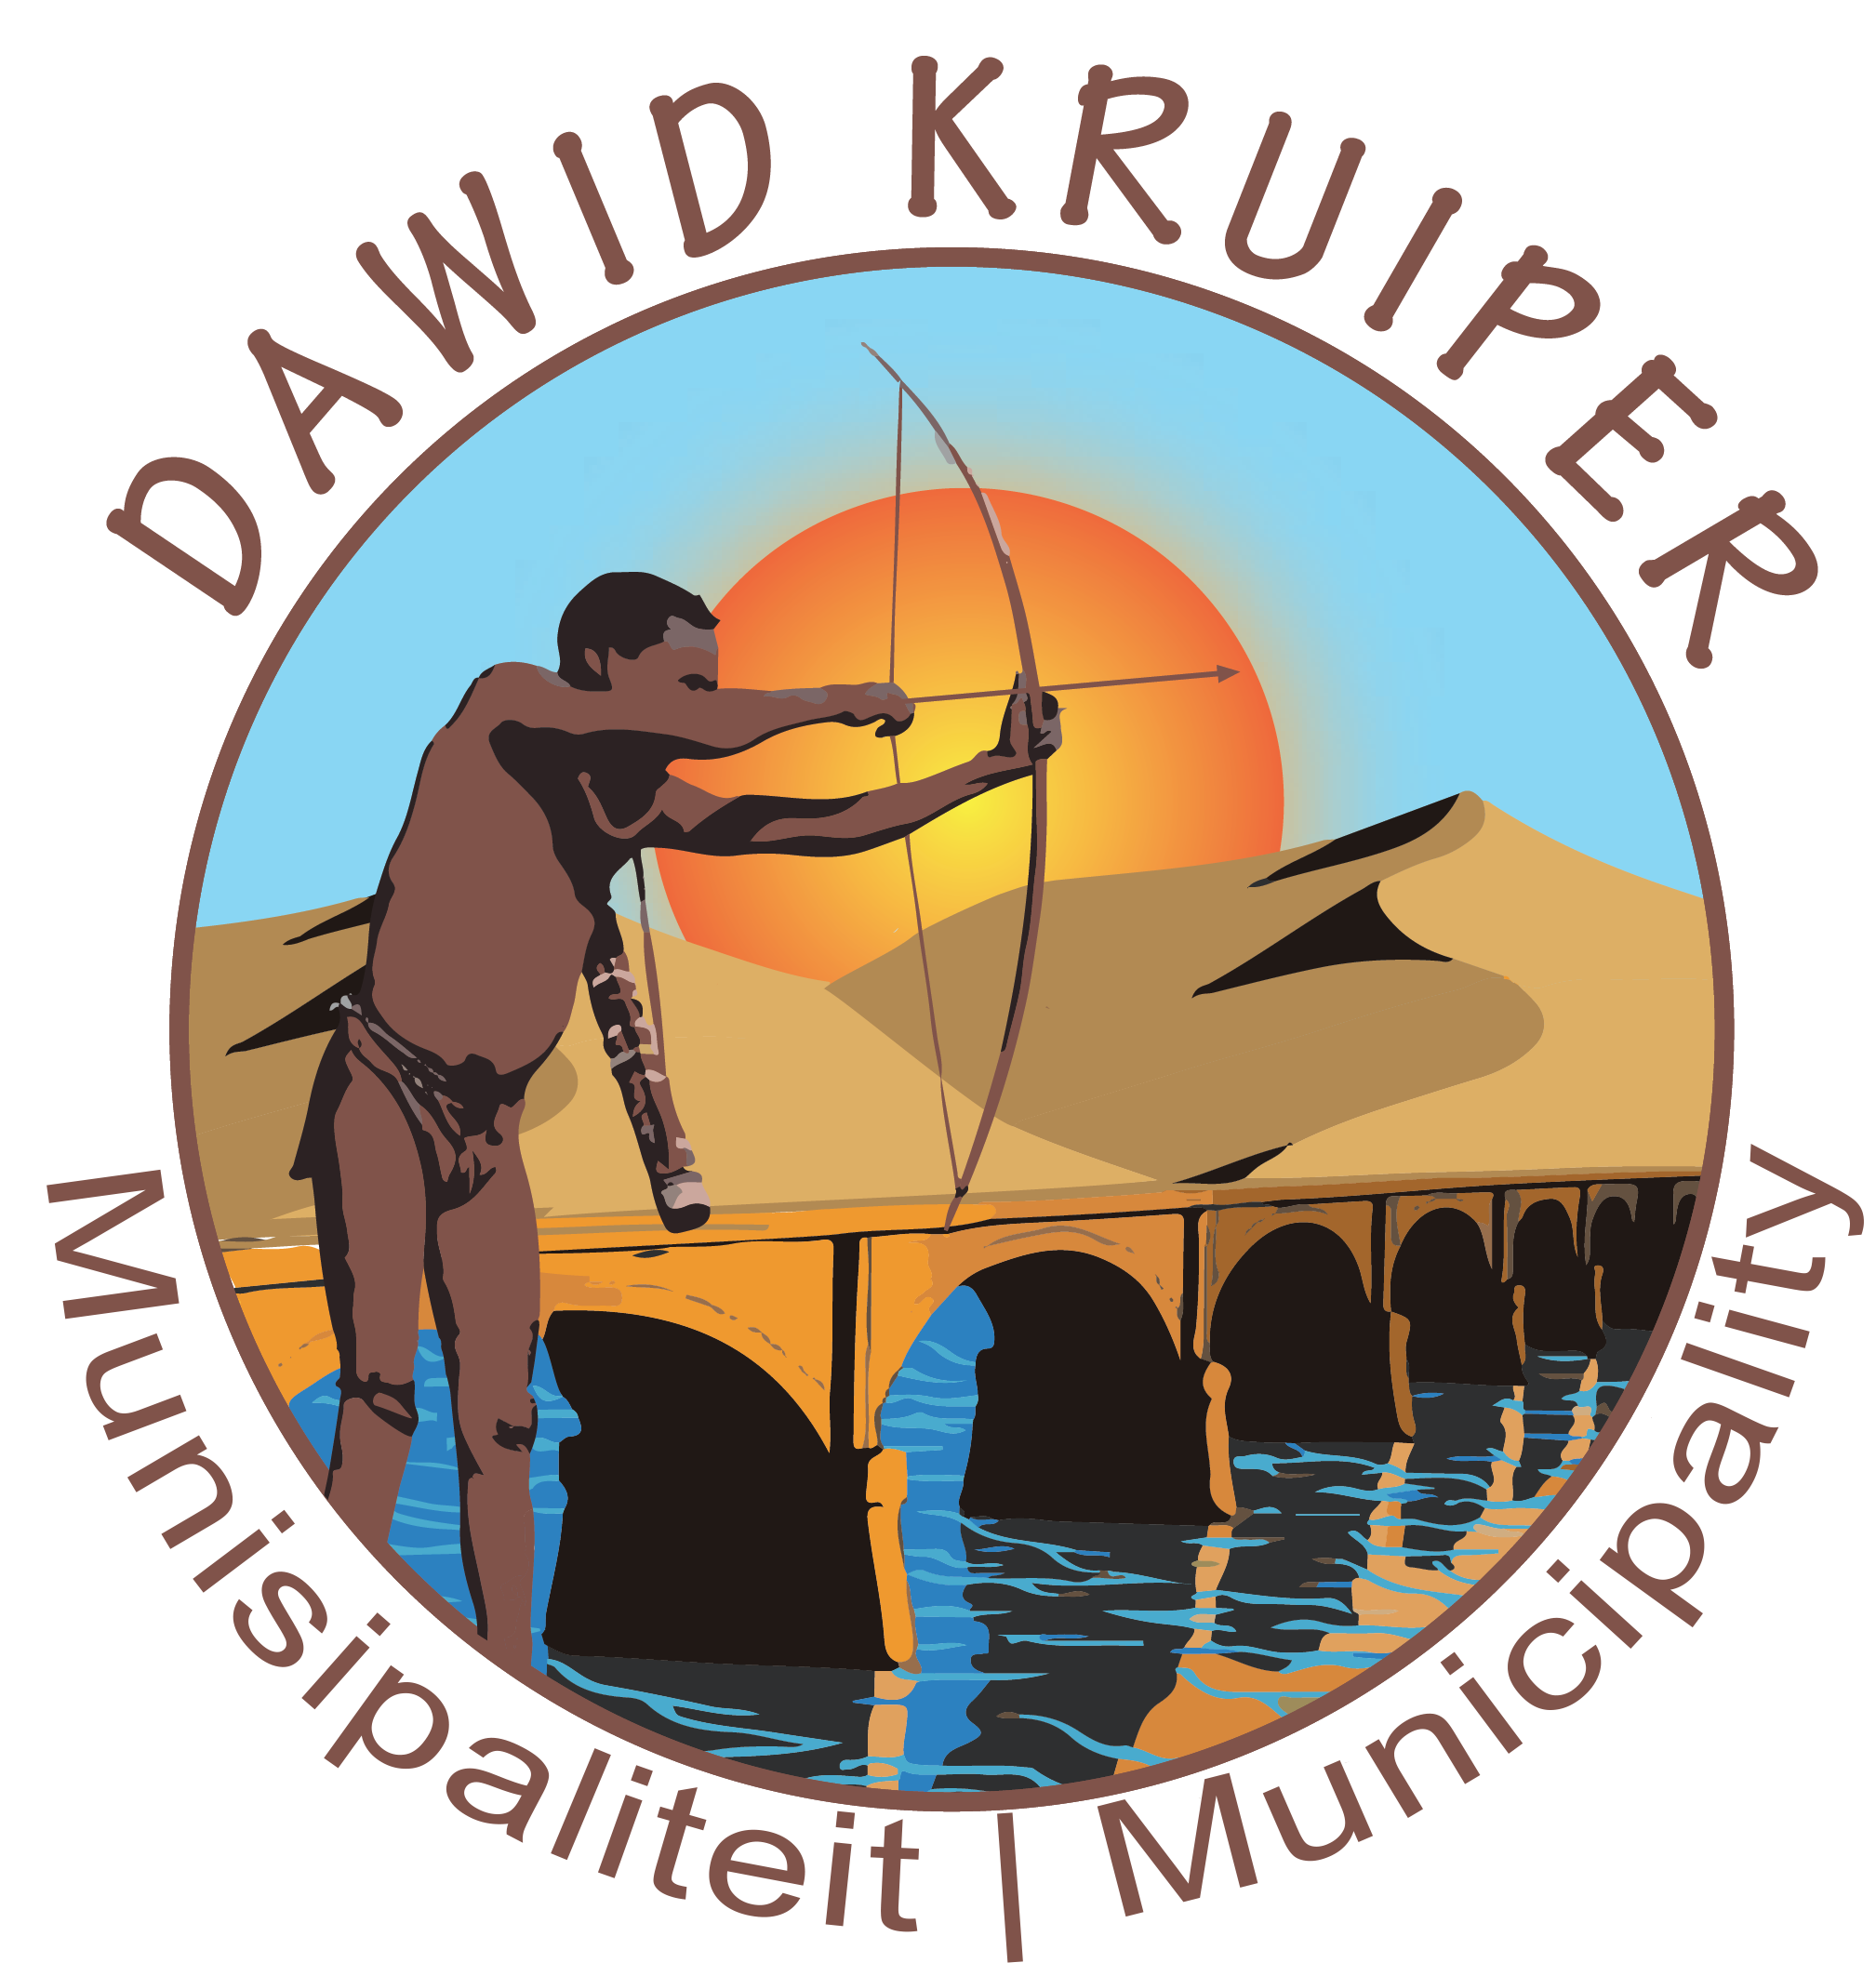 Contract clipart municipal engineer. New logo for dawid